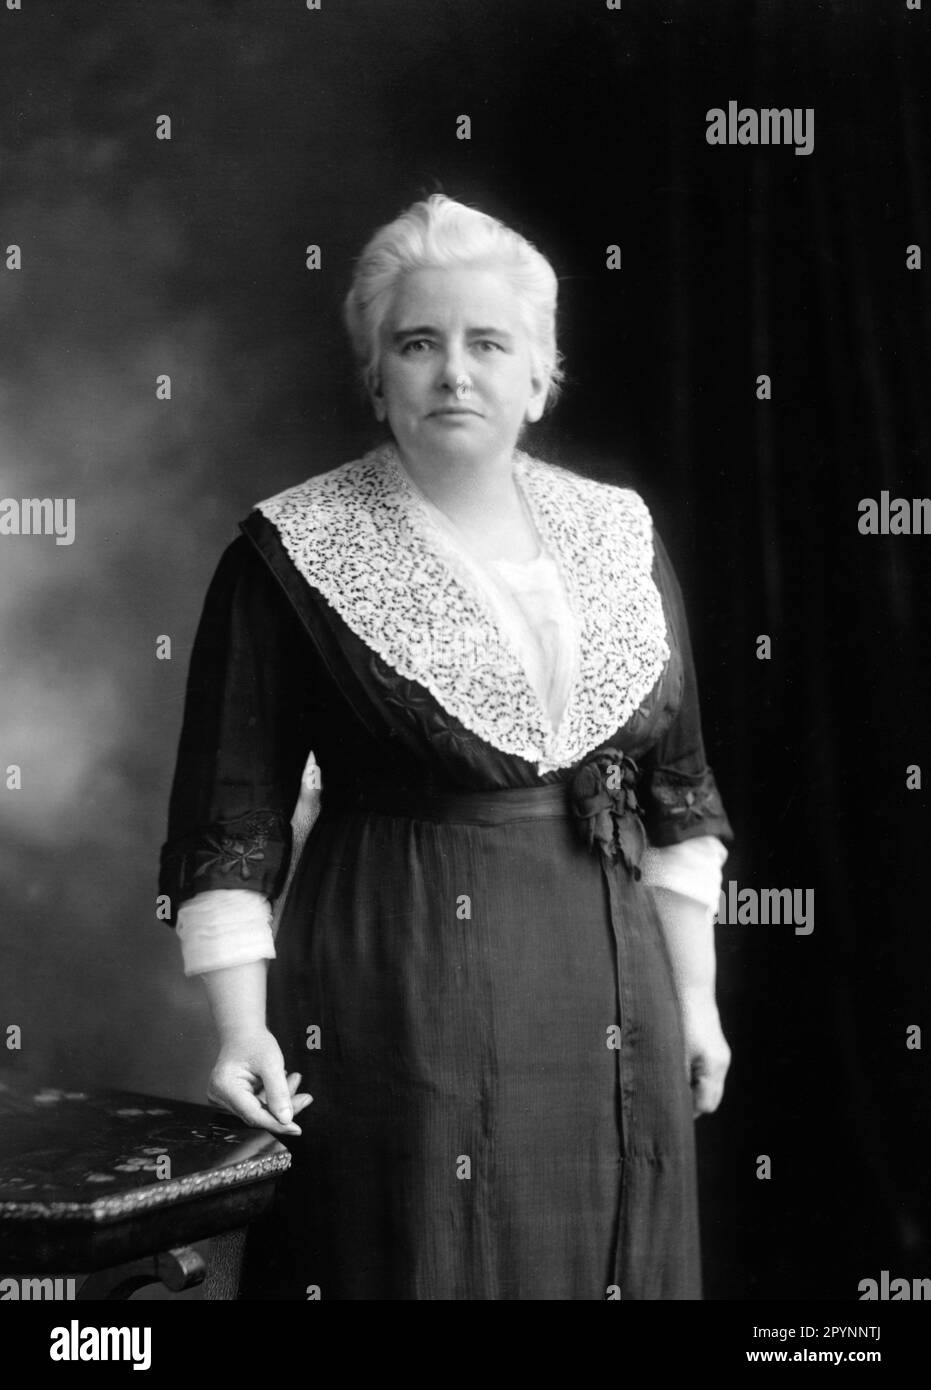 Anna Shaw. Portrait of the American suffragist and temperance movement activist, Anna Howard Shaw (1847-1919), c. 1915 Stock Photo